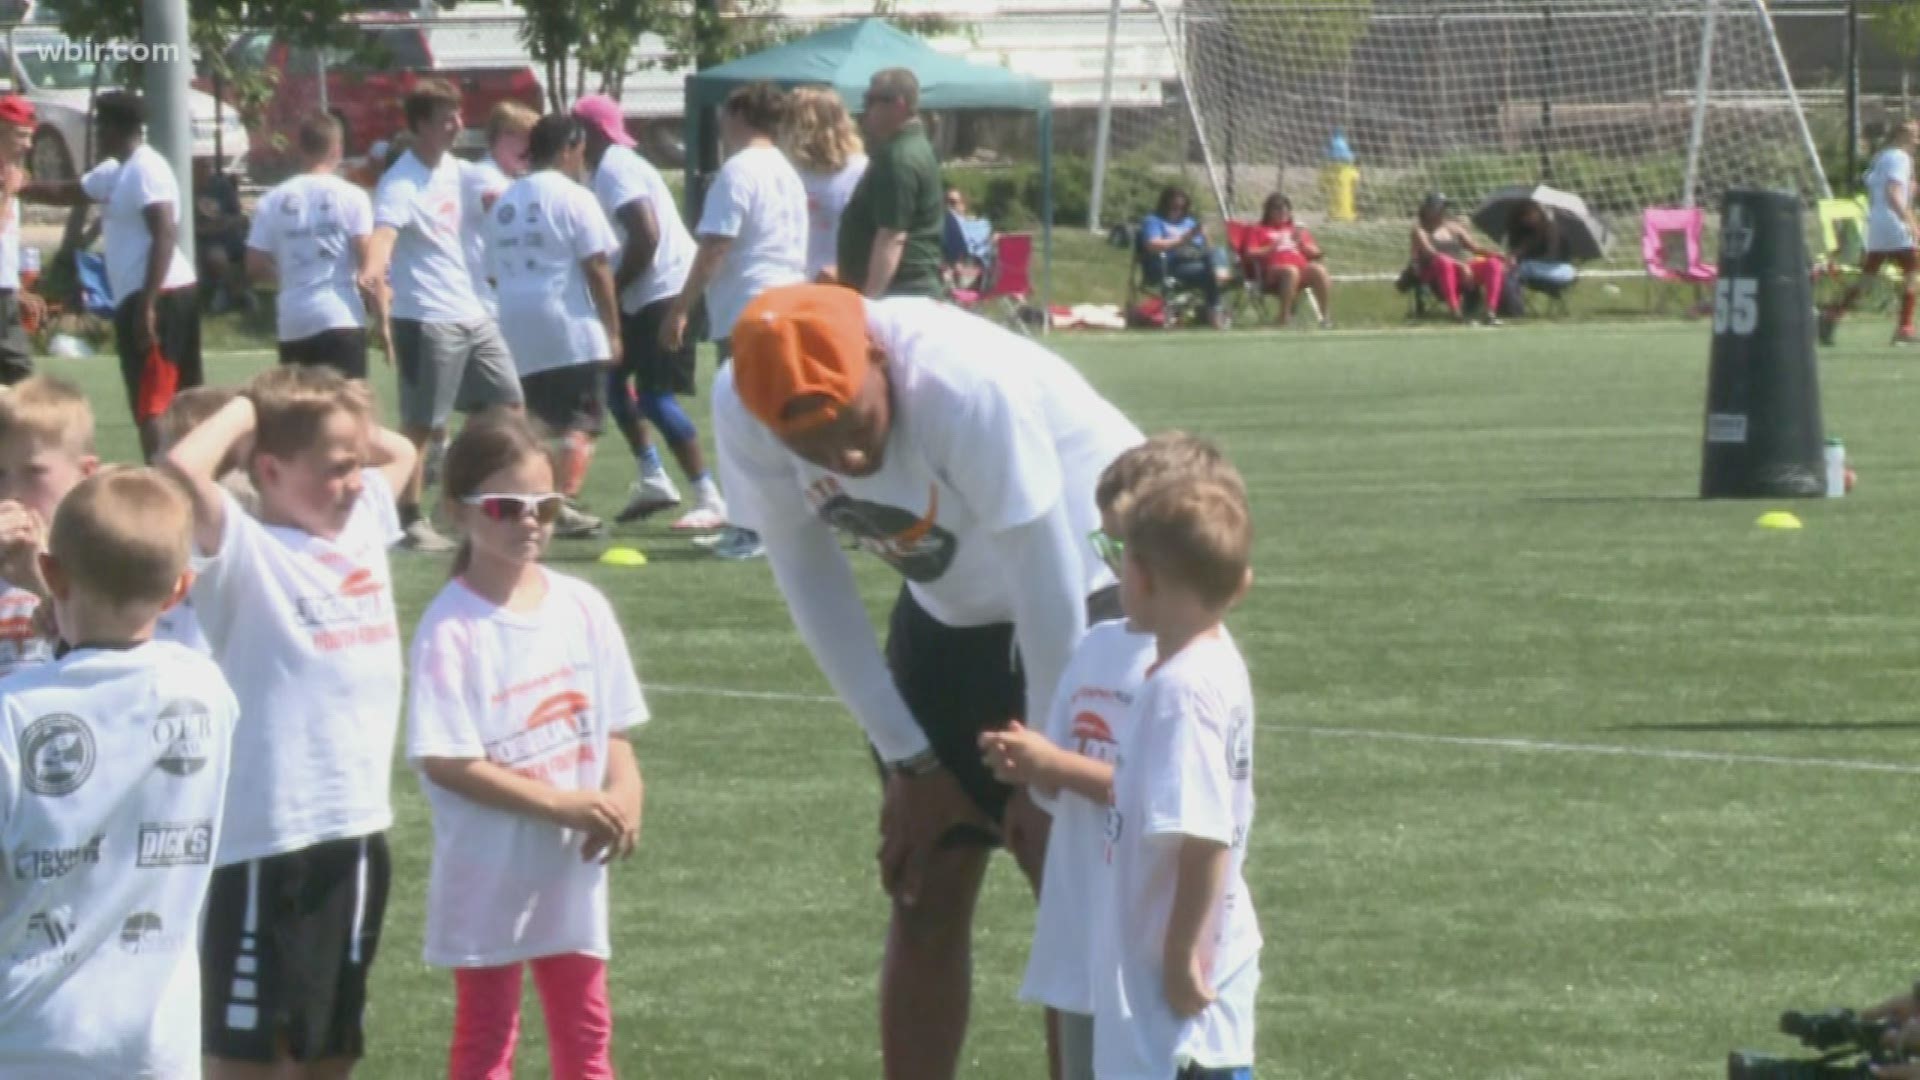 The Joshua Dobbs Youth Football camp is May 30 at the Lonsdale Ministry Complex, flexworksports.com/upcoming-camps. Jan. 30, 2020-4pm.